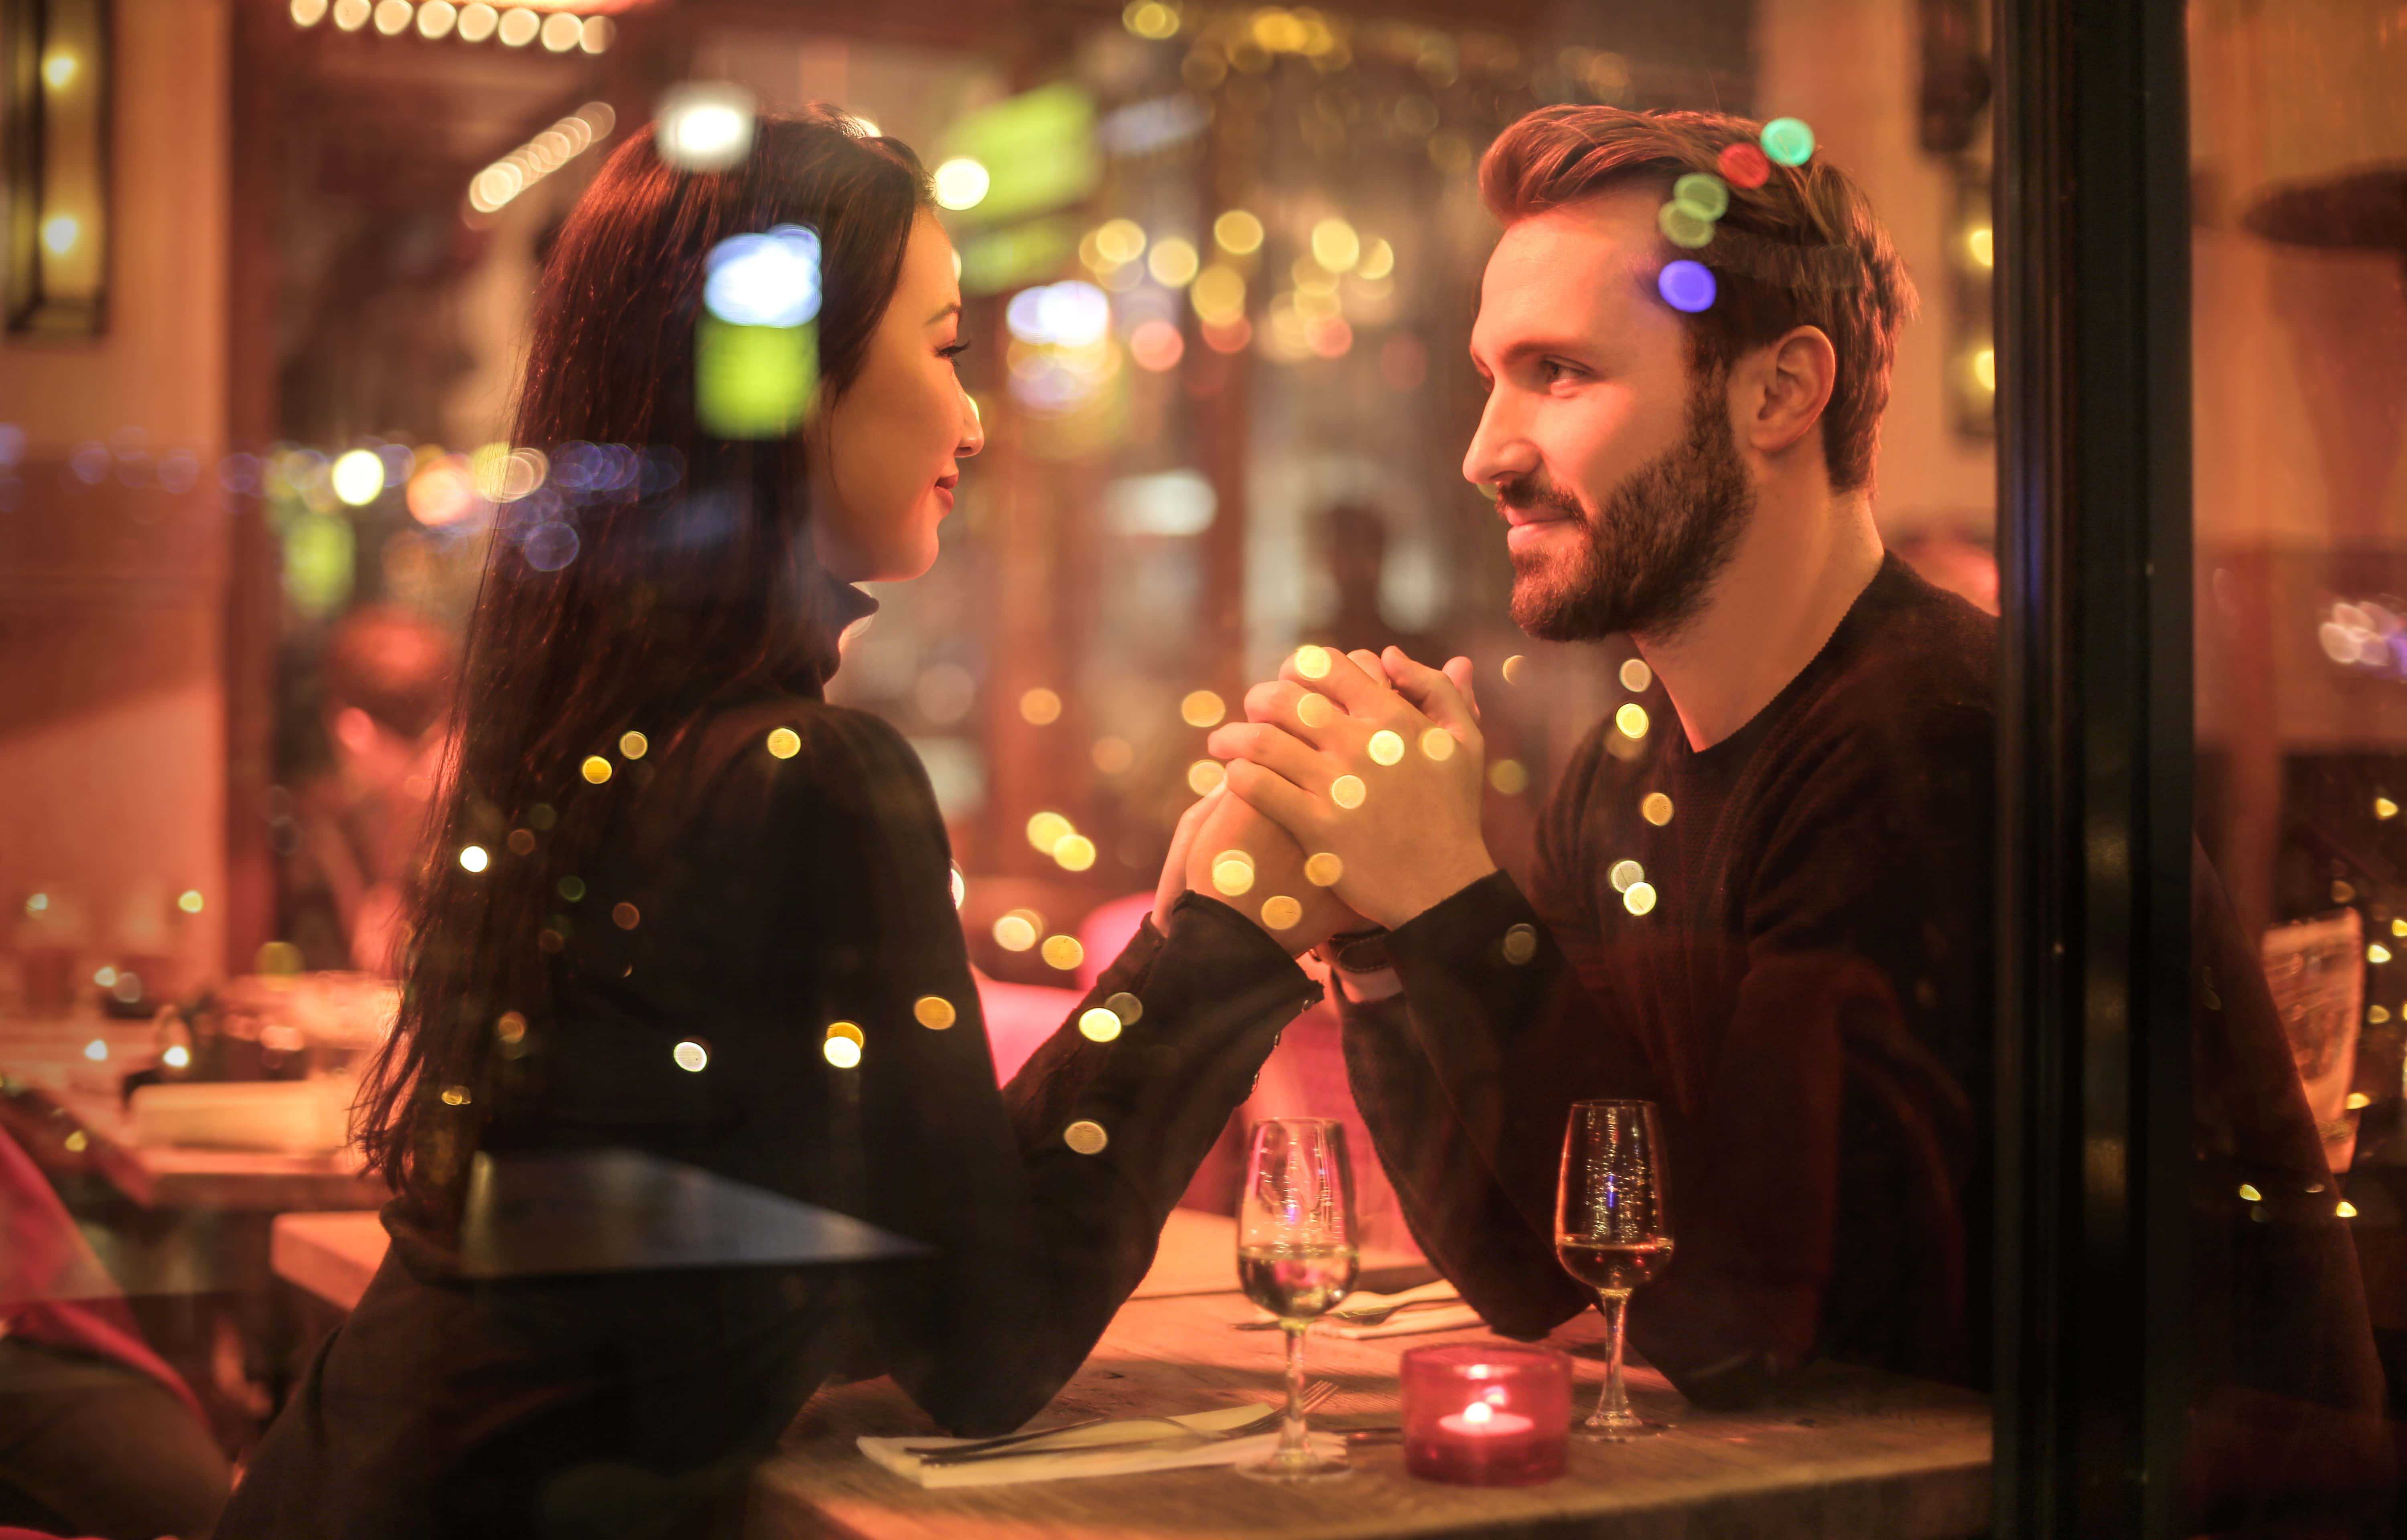 A young couple holds hands and looks into each others eyes over a candle lit dinner